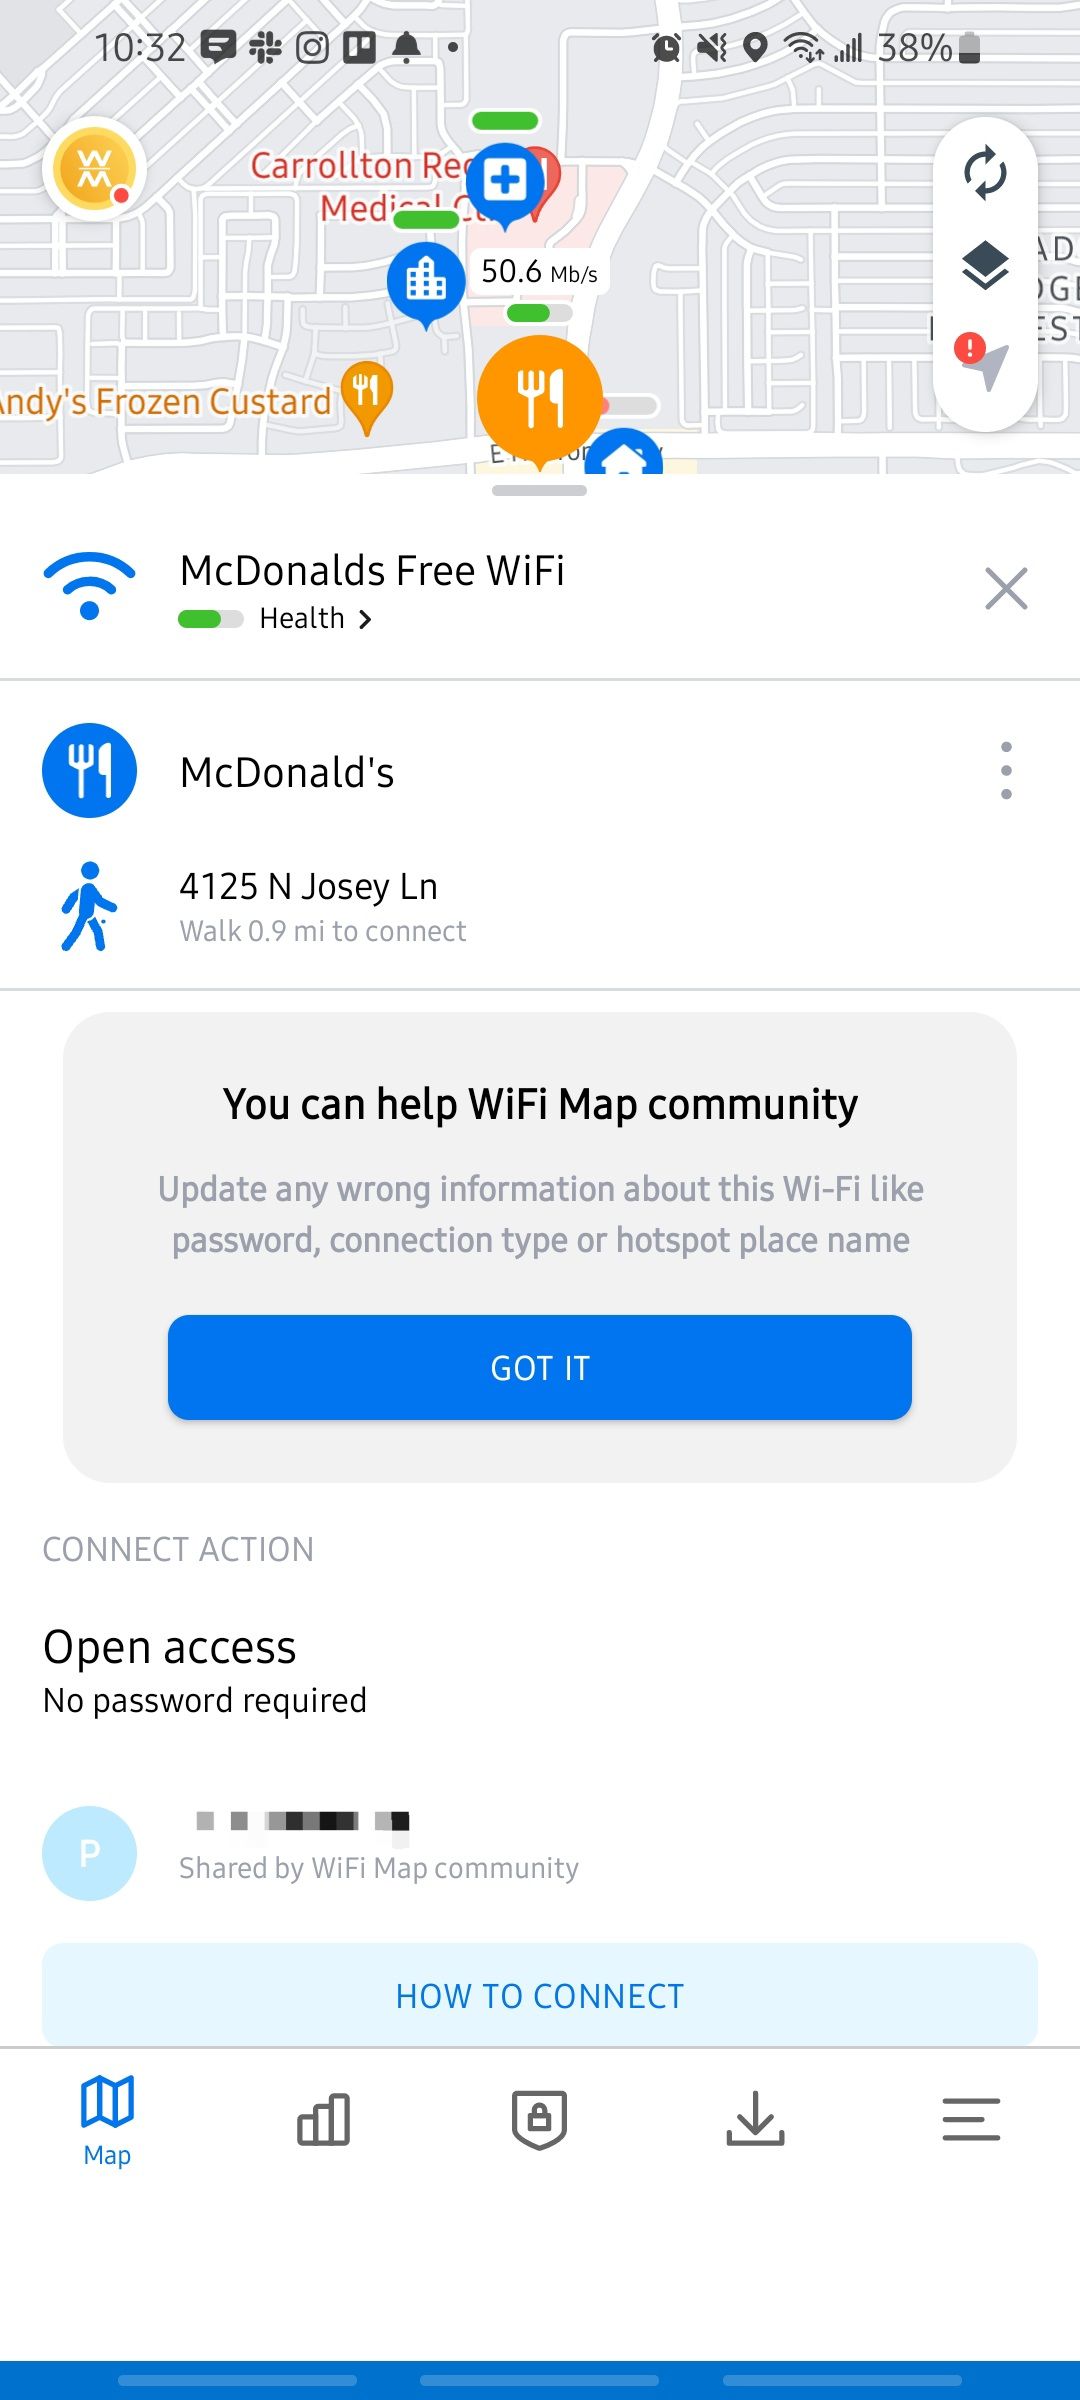 Screenshot of a McDonald's free Wifi location in the WiFi Map app